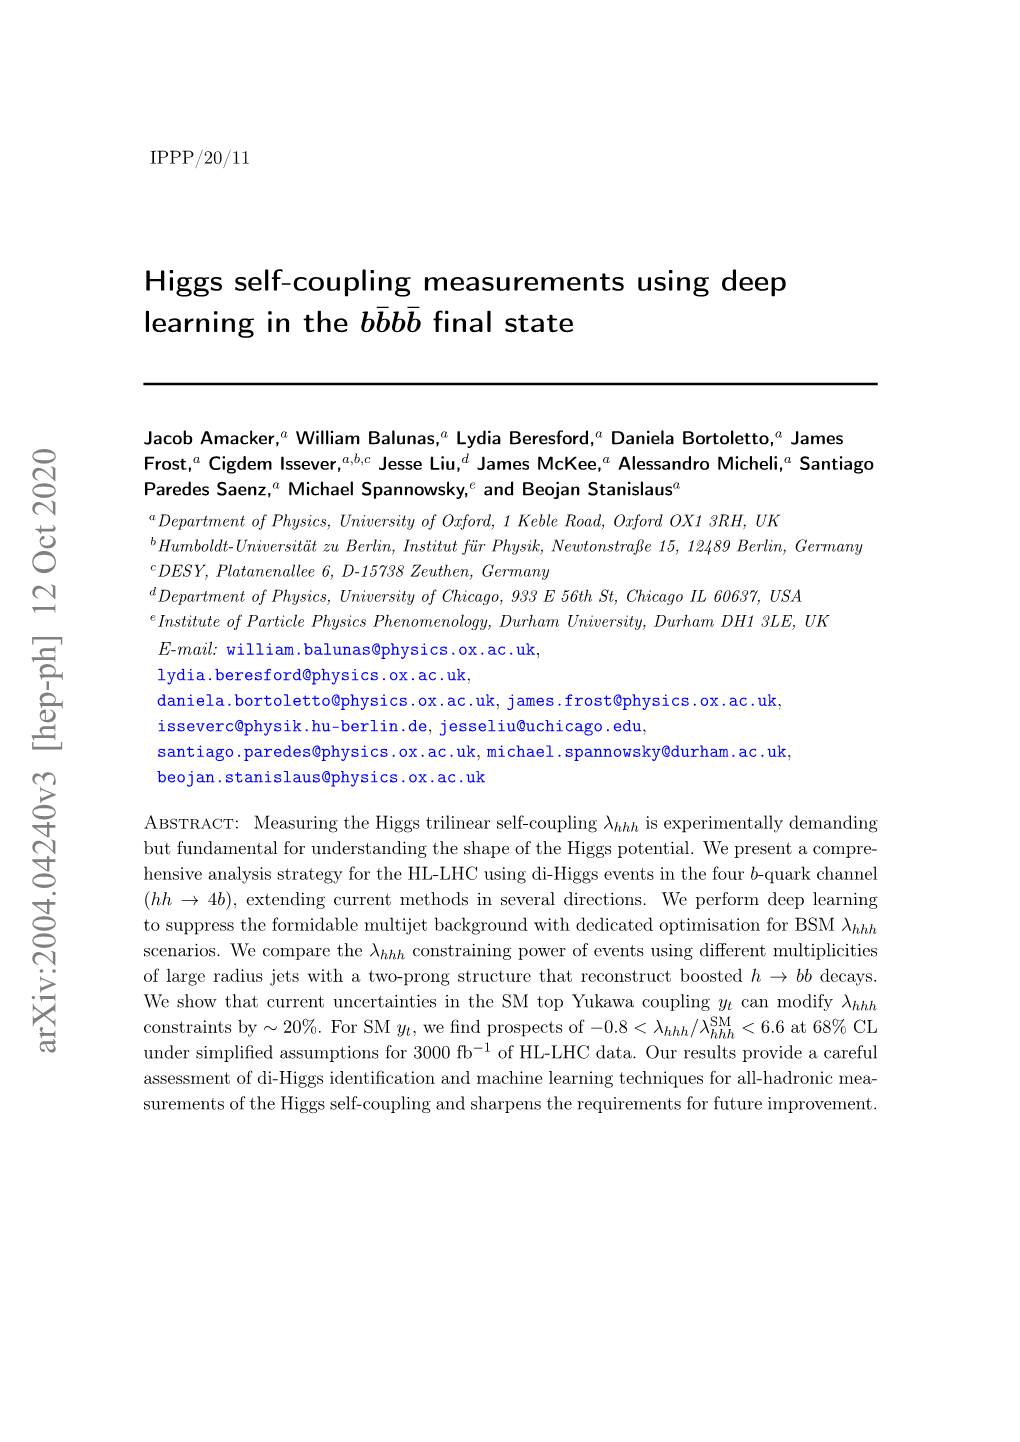 Higgs Self-Coupling Measurements Using Deep Learning in the B¯Bb¯B ﬁnal State